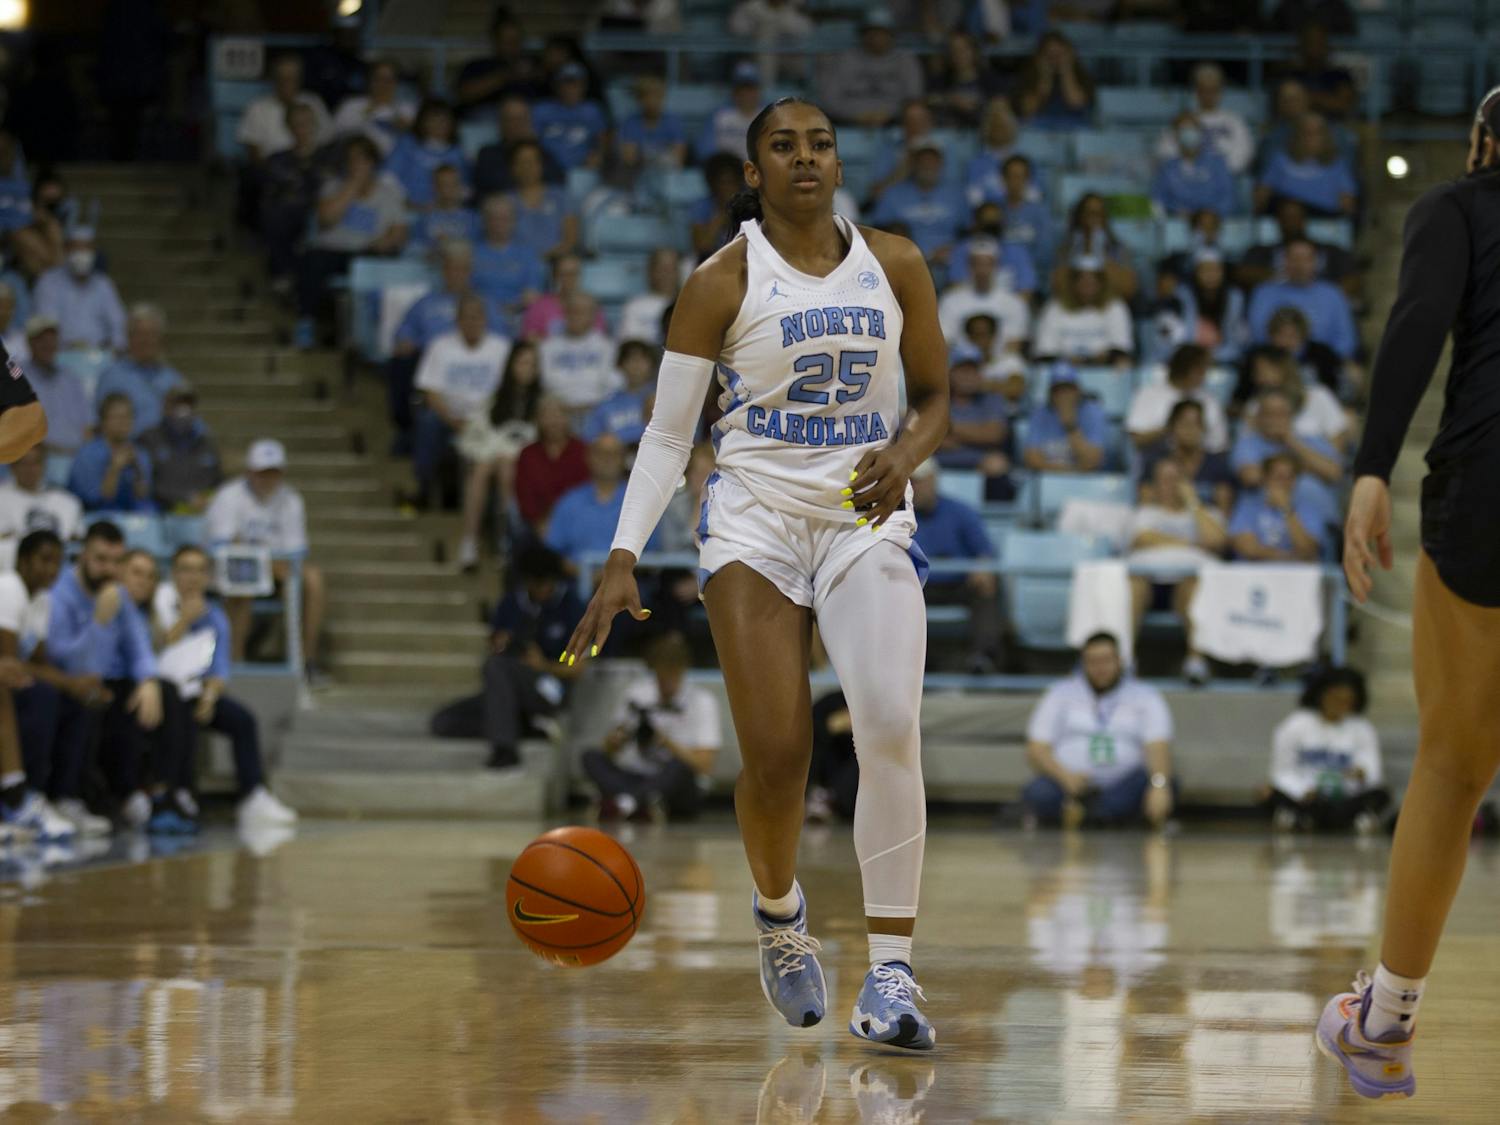 Junior guard Deja Kelly (25) dribbles the ball up court during the women's basketball game against Virginia Tech on Thursday, Feb. 23, 2023, at Carmichael Arena. VT beat UNC 61-59.